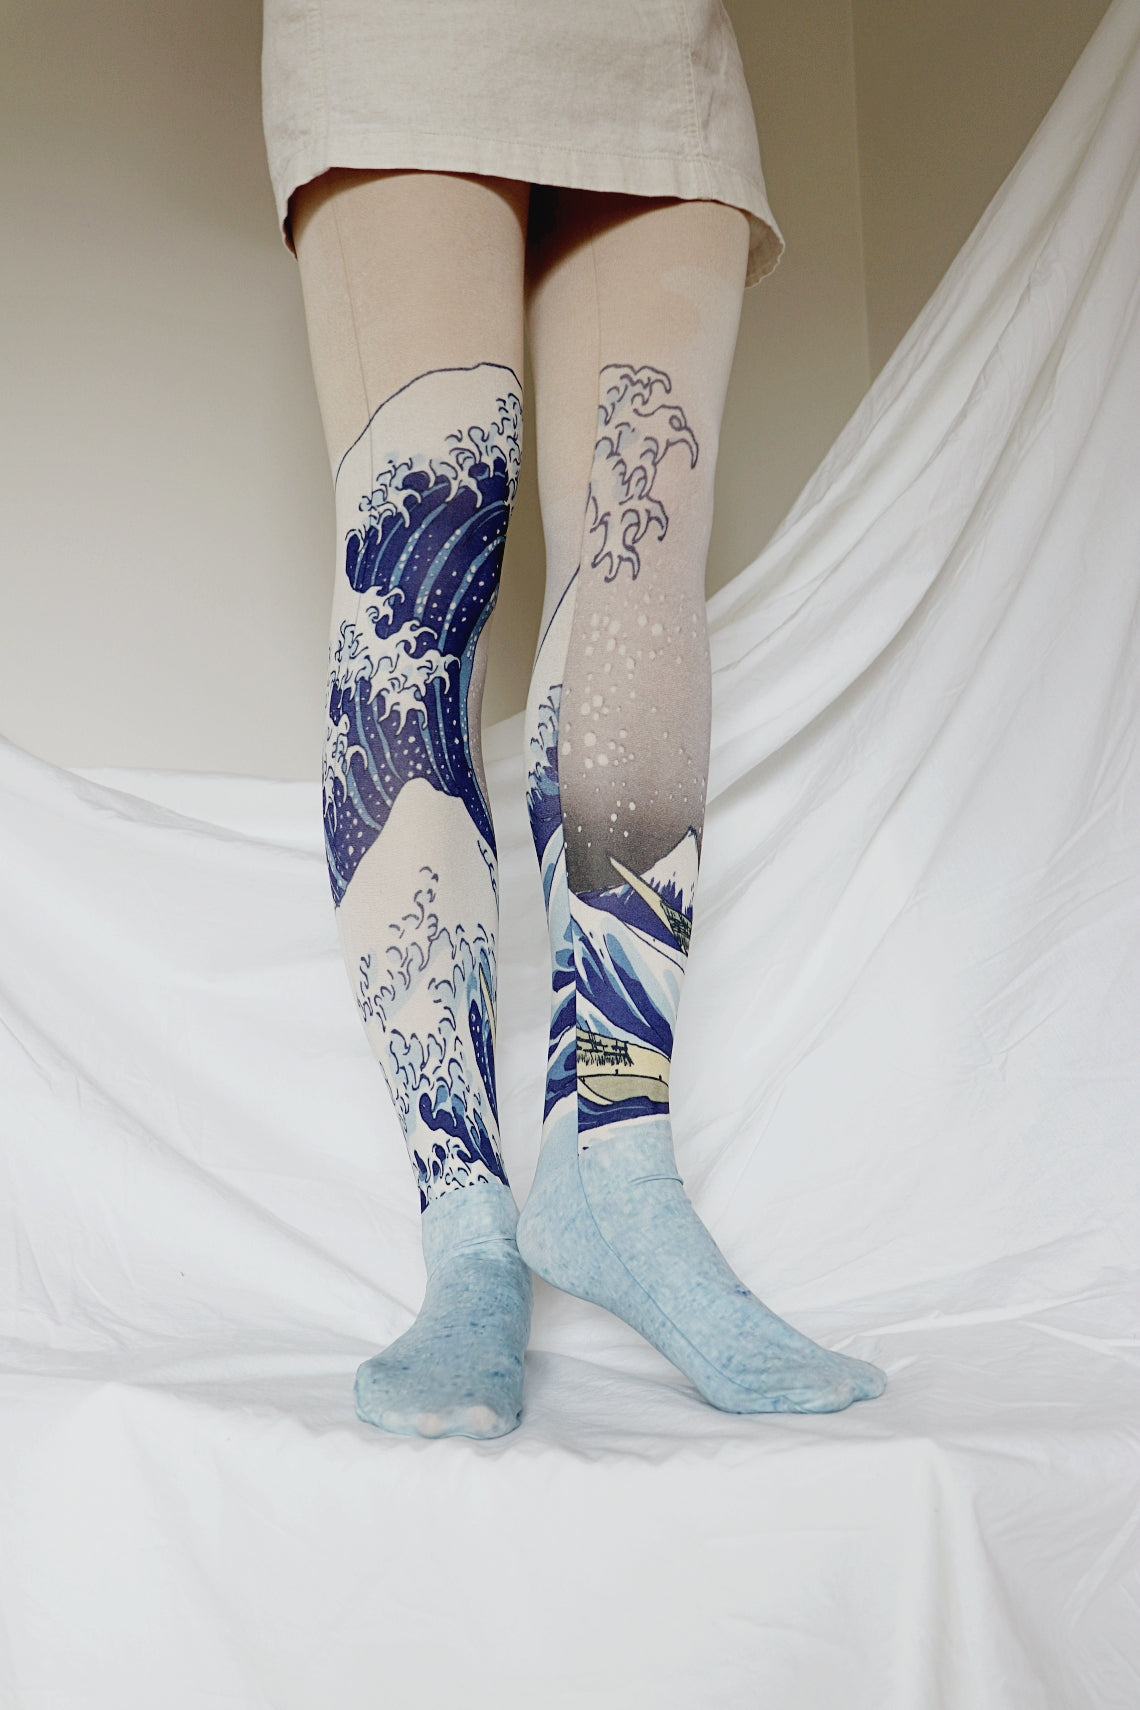 Tights that has a print of The great wave of Hokusai art.